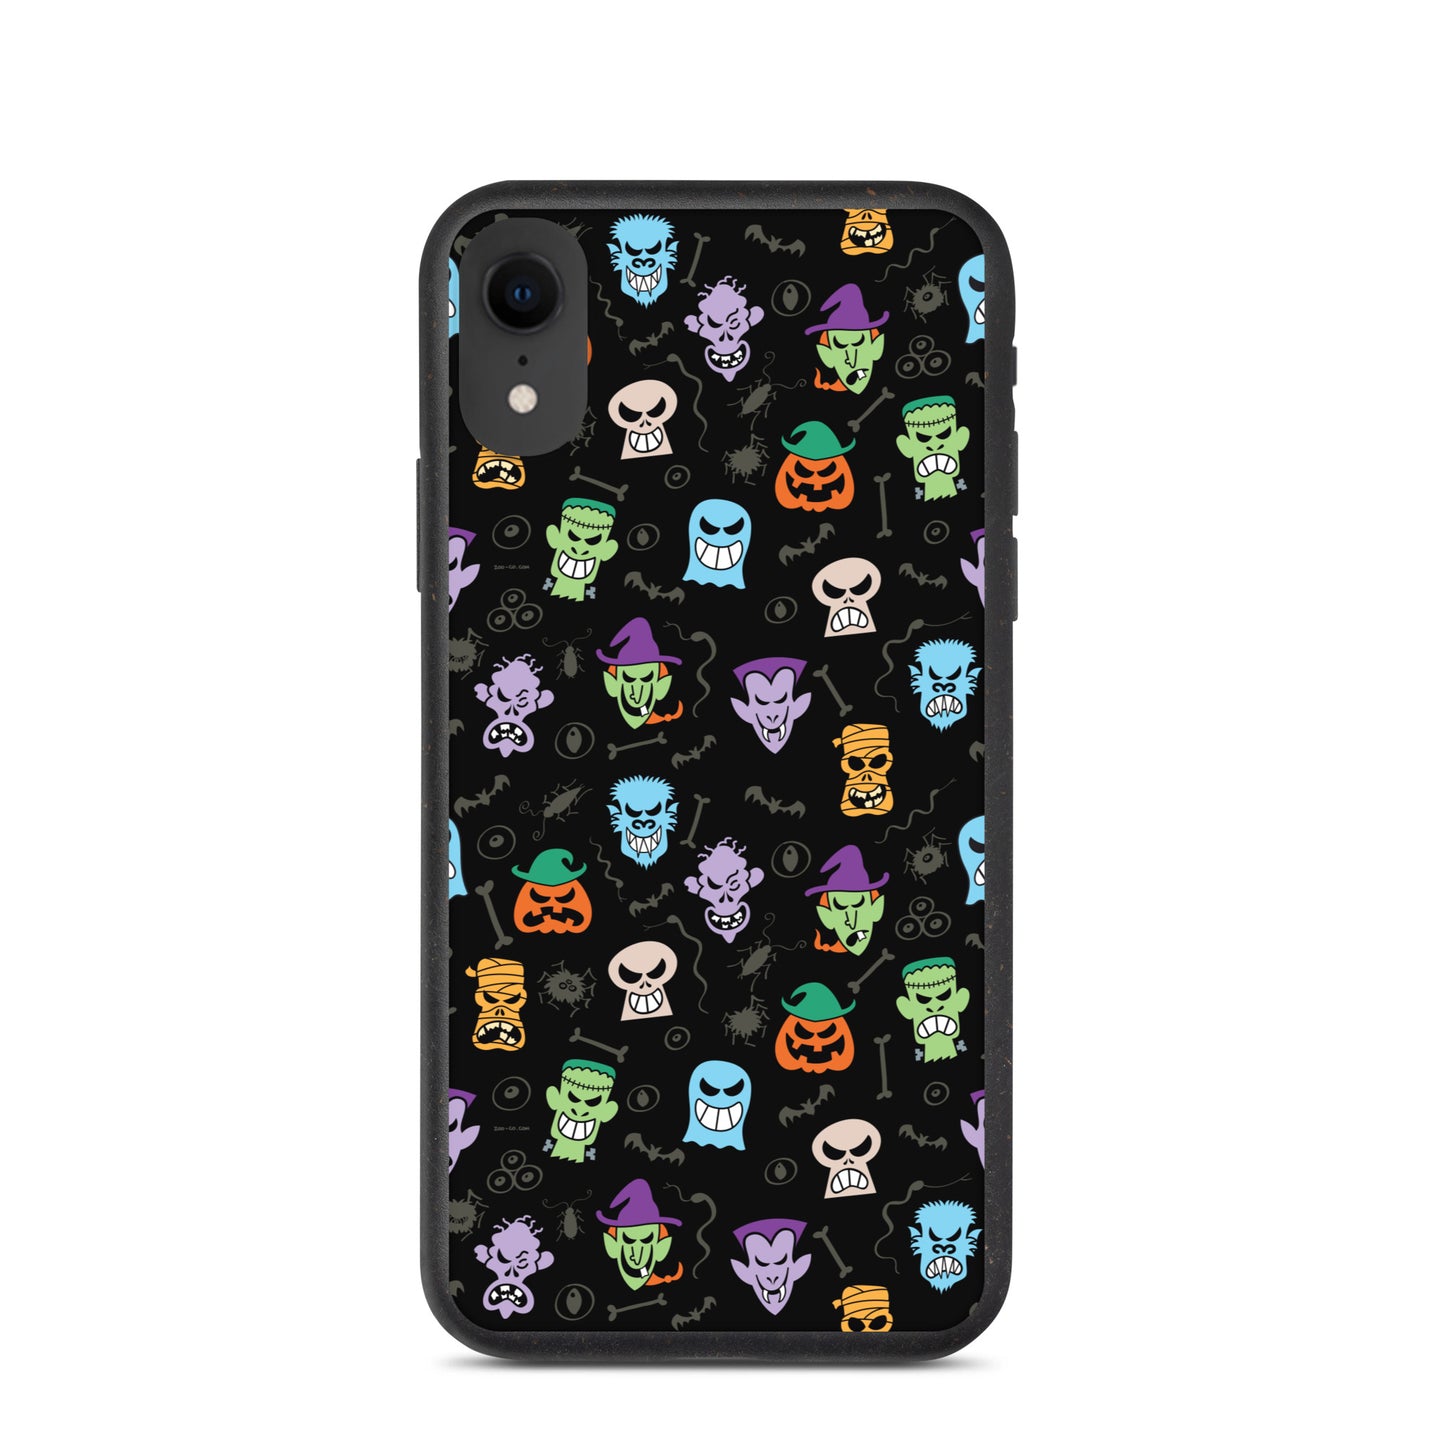 Scary Halloween faces Speckled iPhone case. iPhone xr